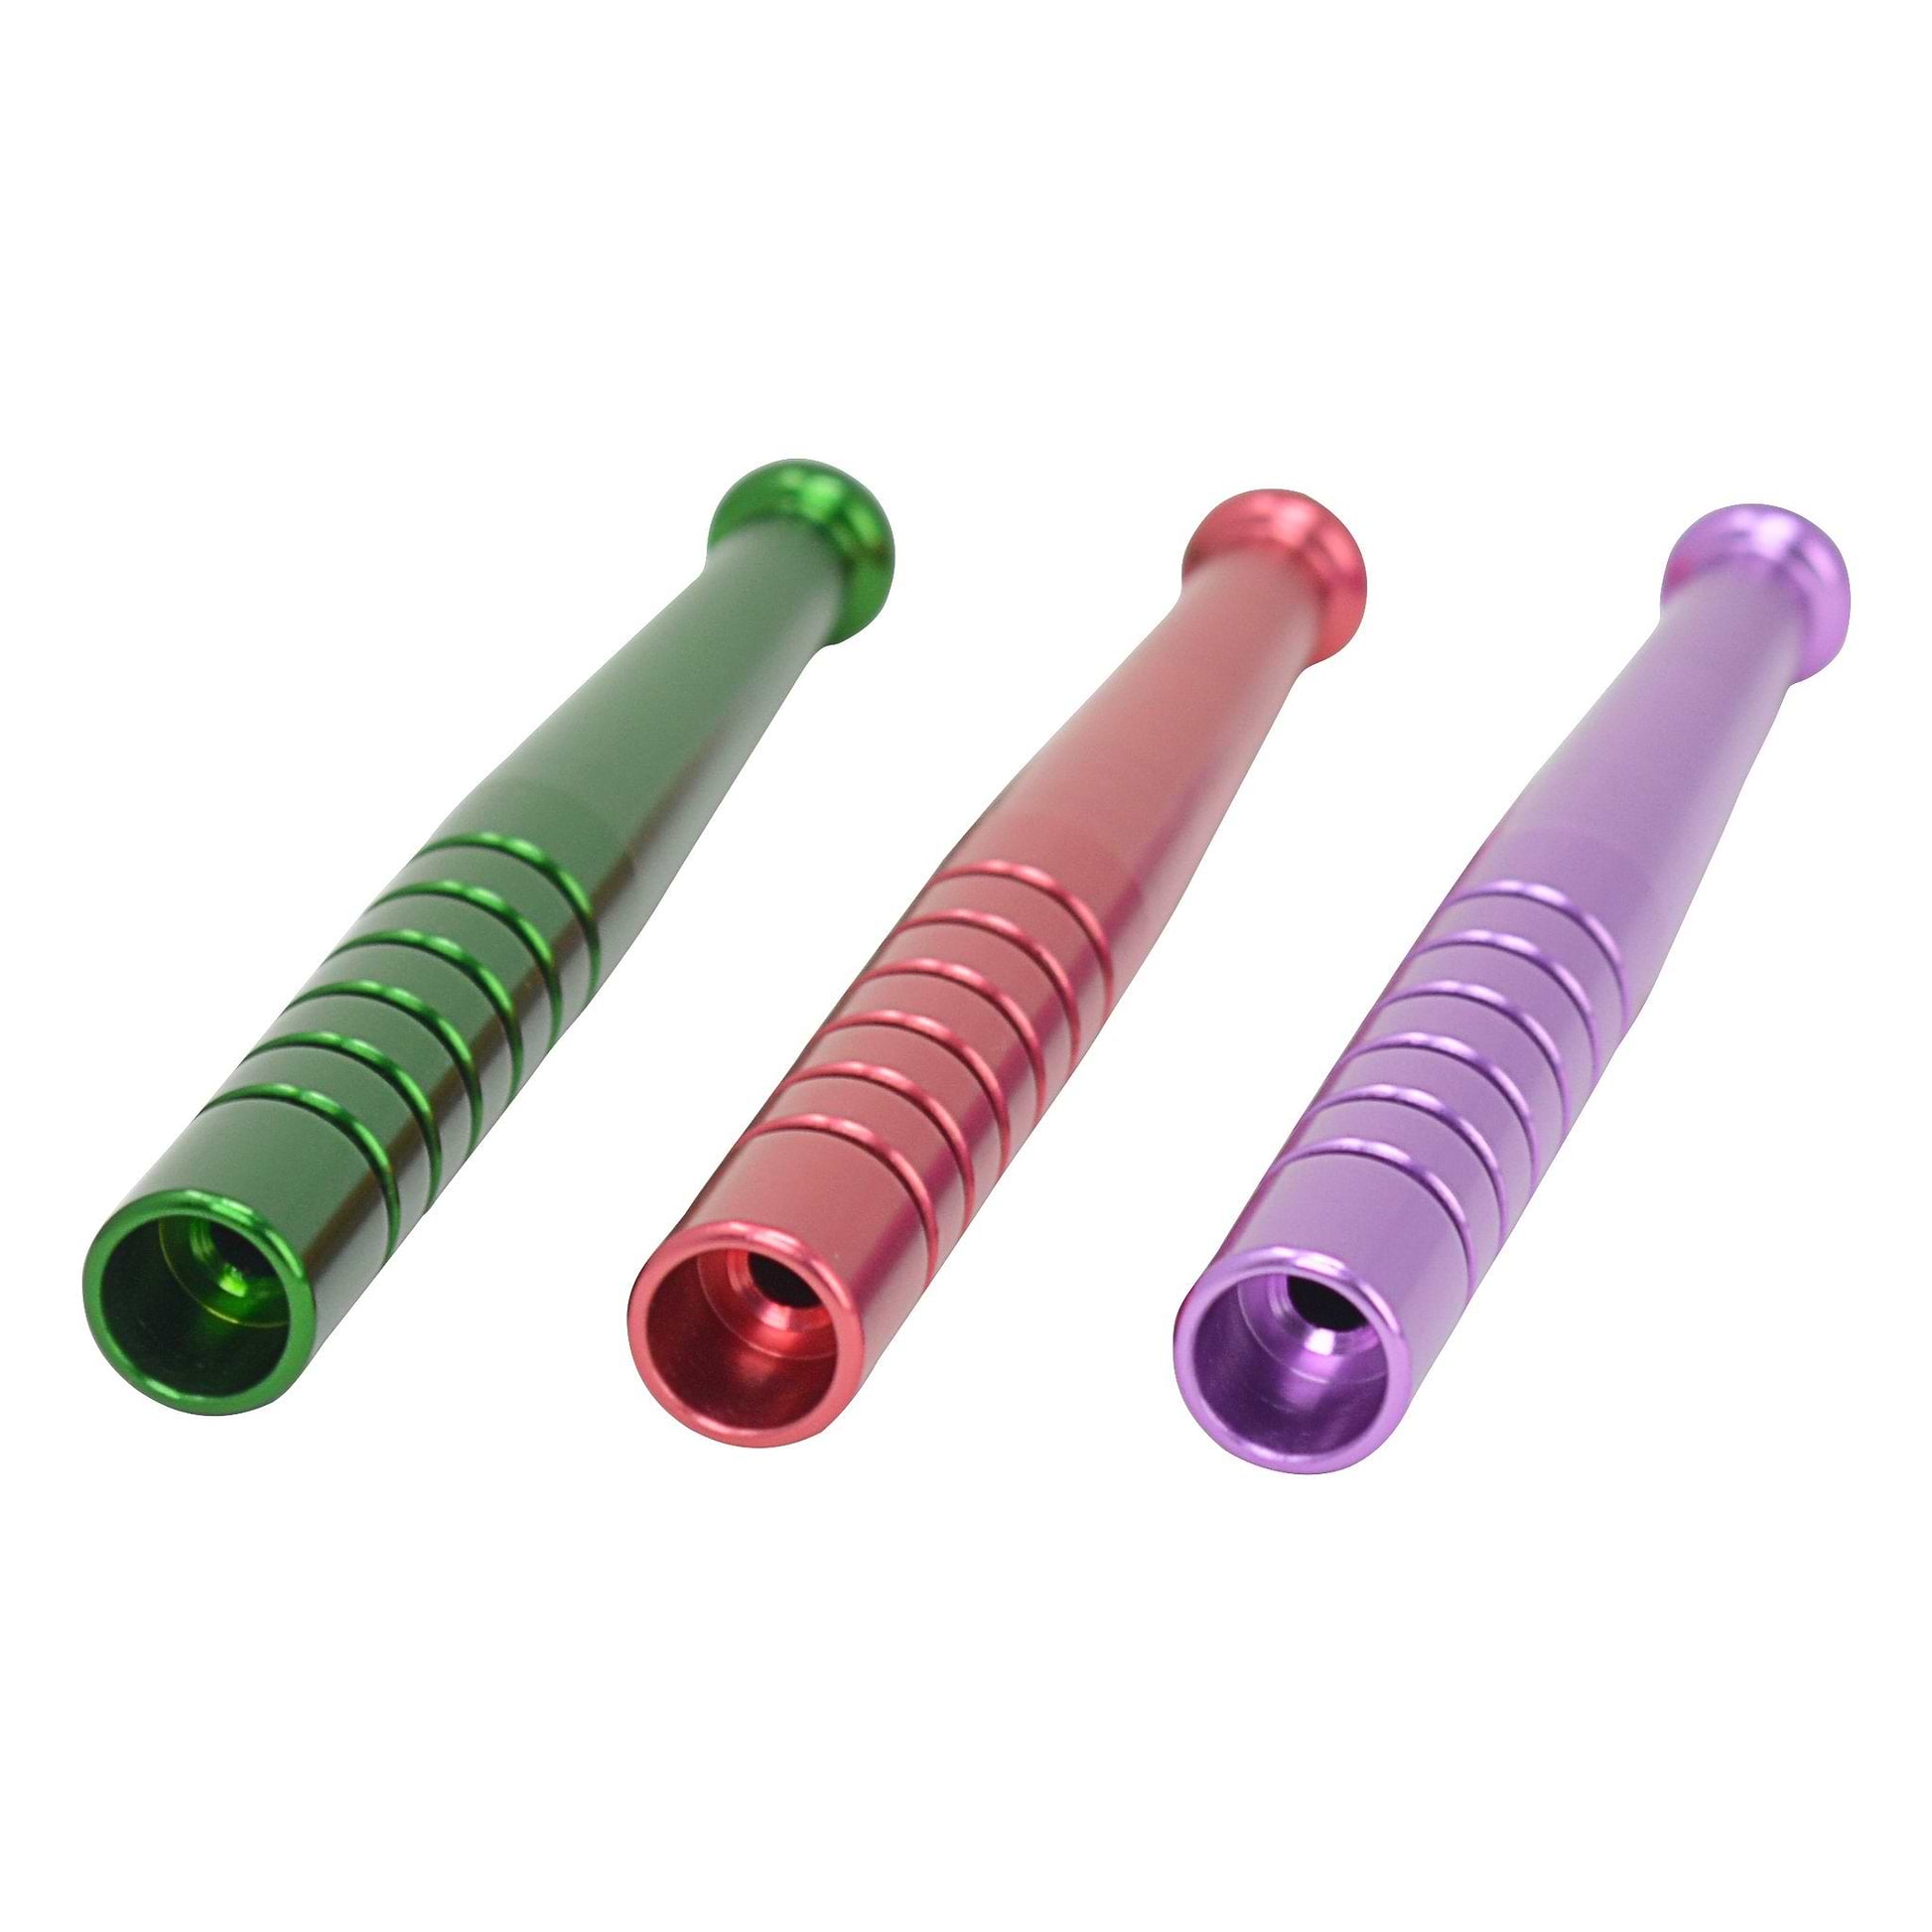 3 colors metal oney little pipe one hitter smoking device with baseball bat design textured ridges